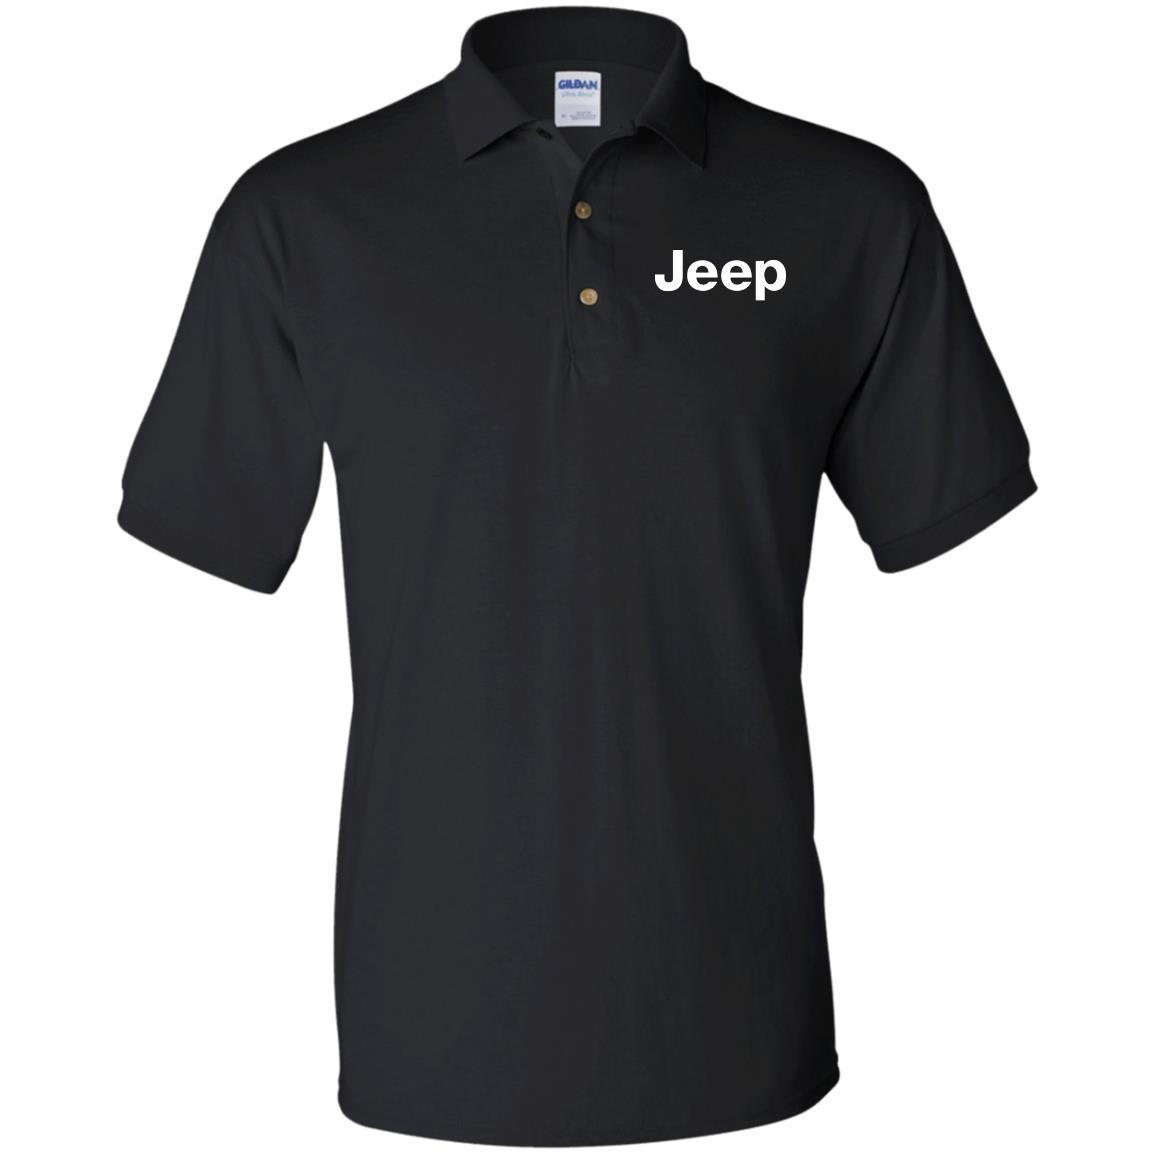 Jeep Jersey Polo Shirt - My Car My Rules